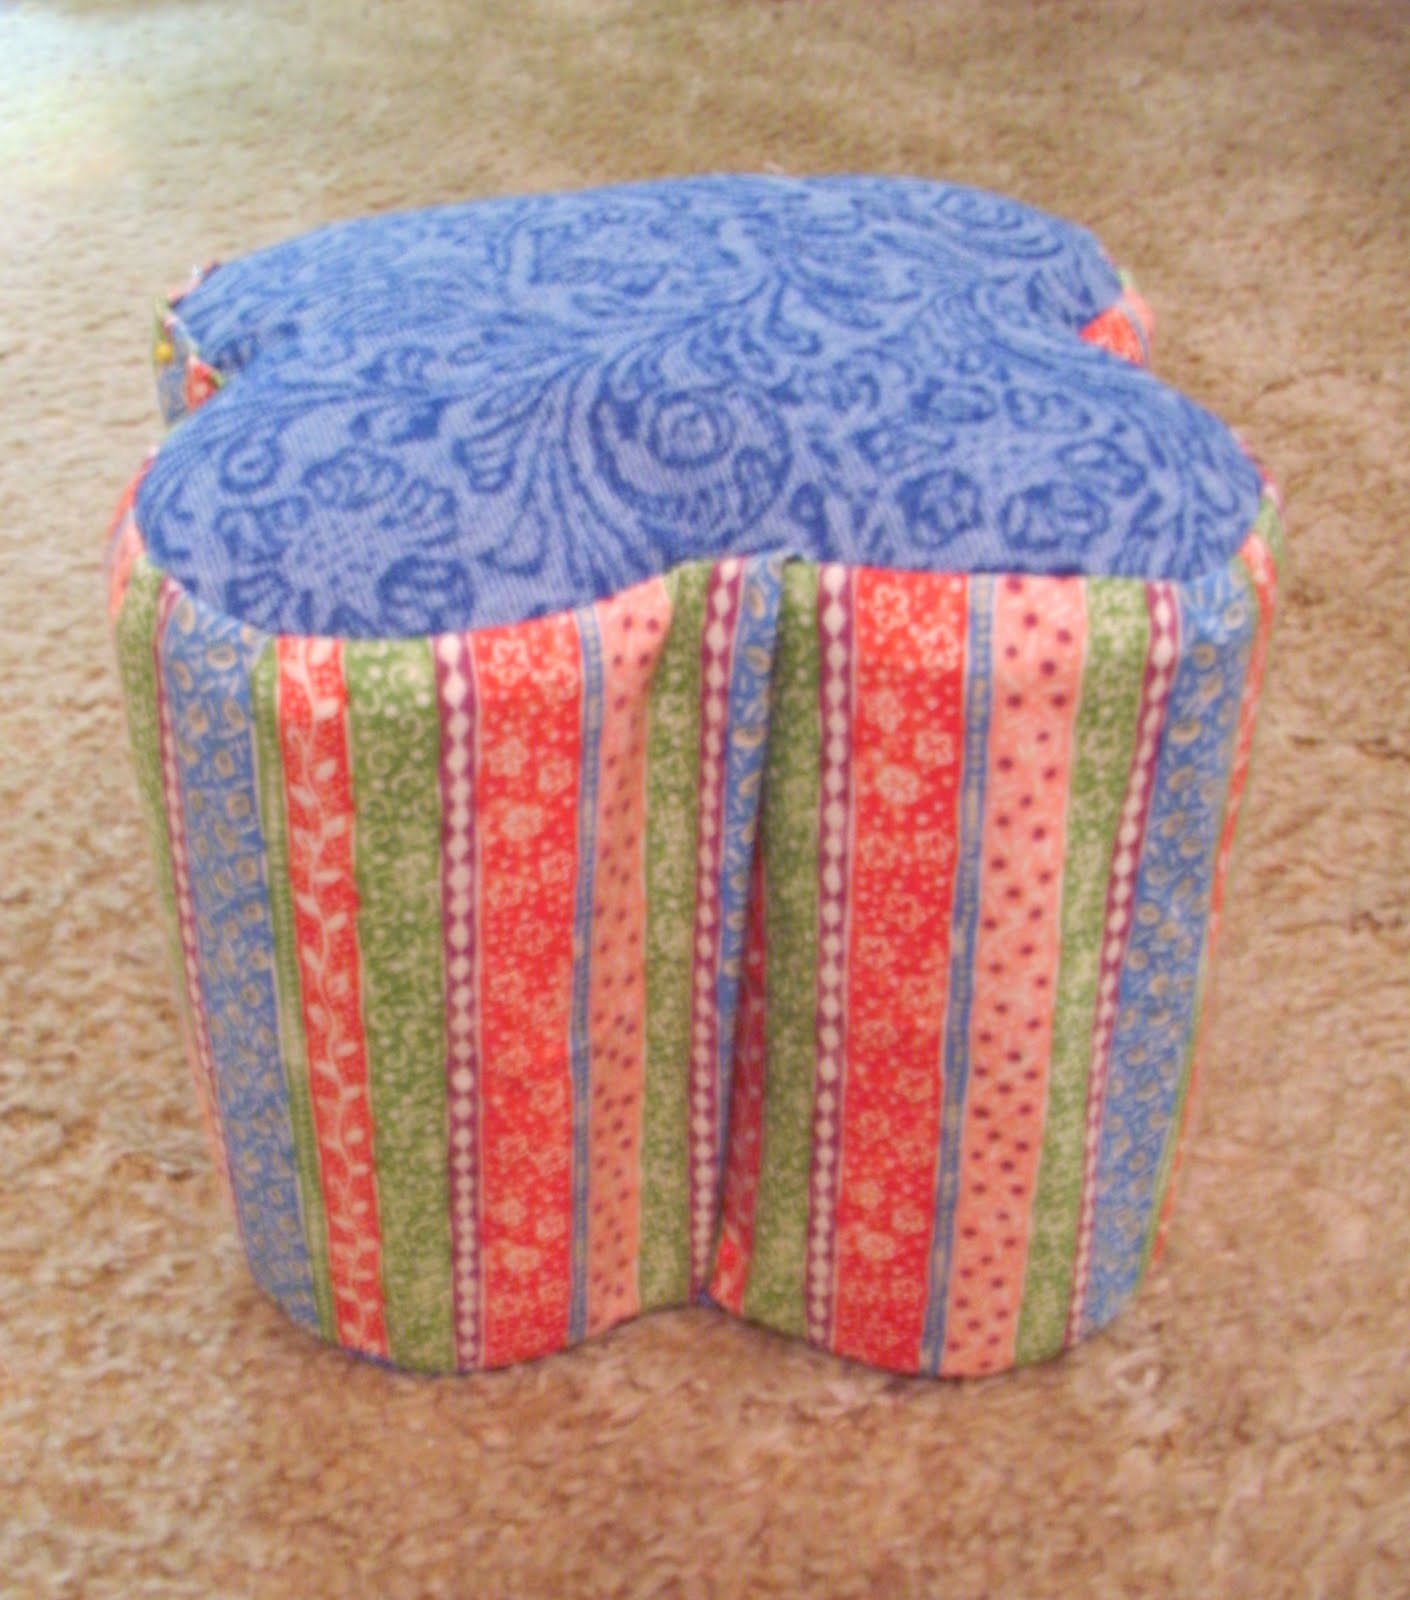 little ottoman (or stepping-stool) made out of cans